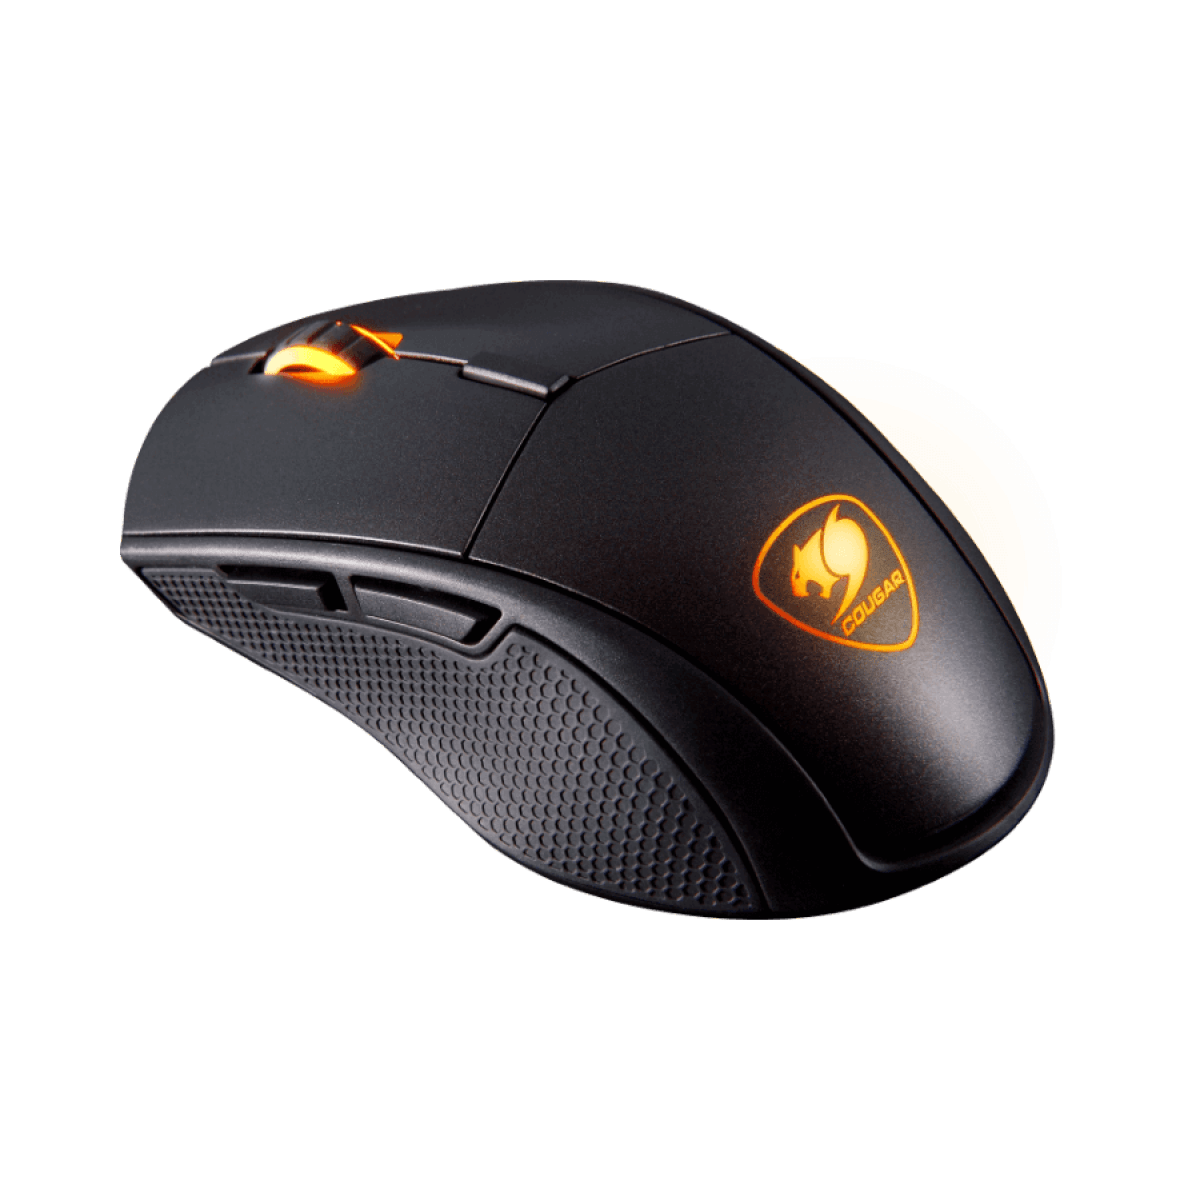 COUGAR Minos X5 and Revenger S FPS Gaming Mice Get International Launch